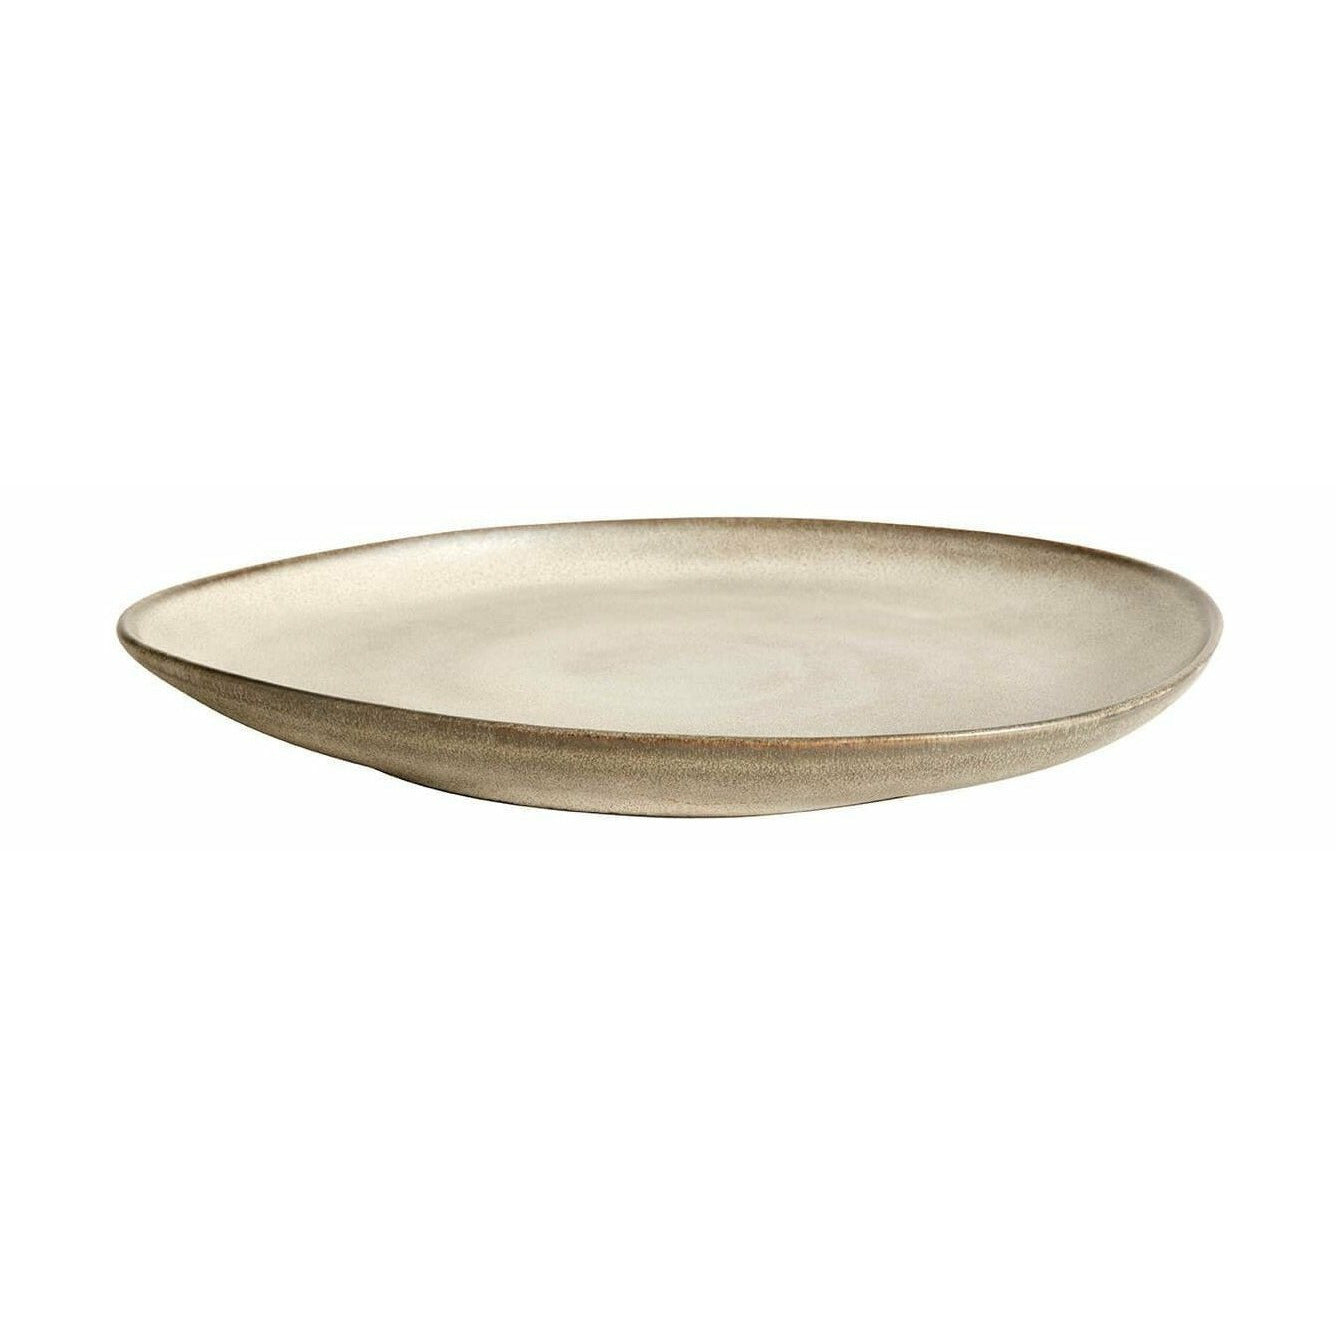 Muubs mame plate østers, 24 cm